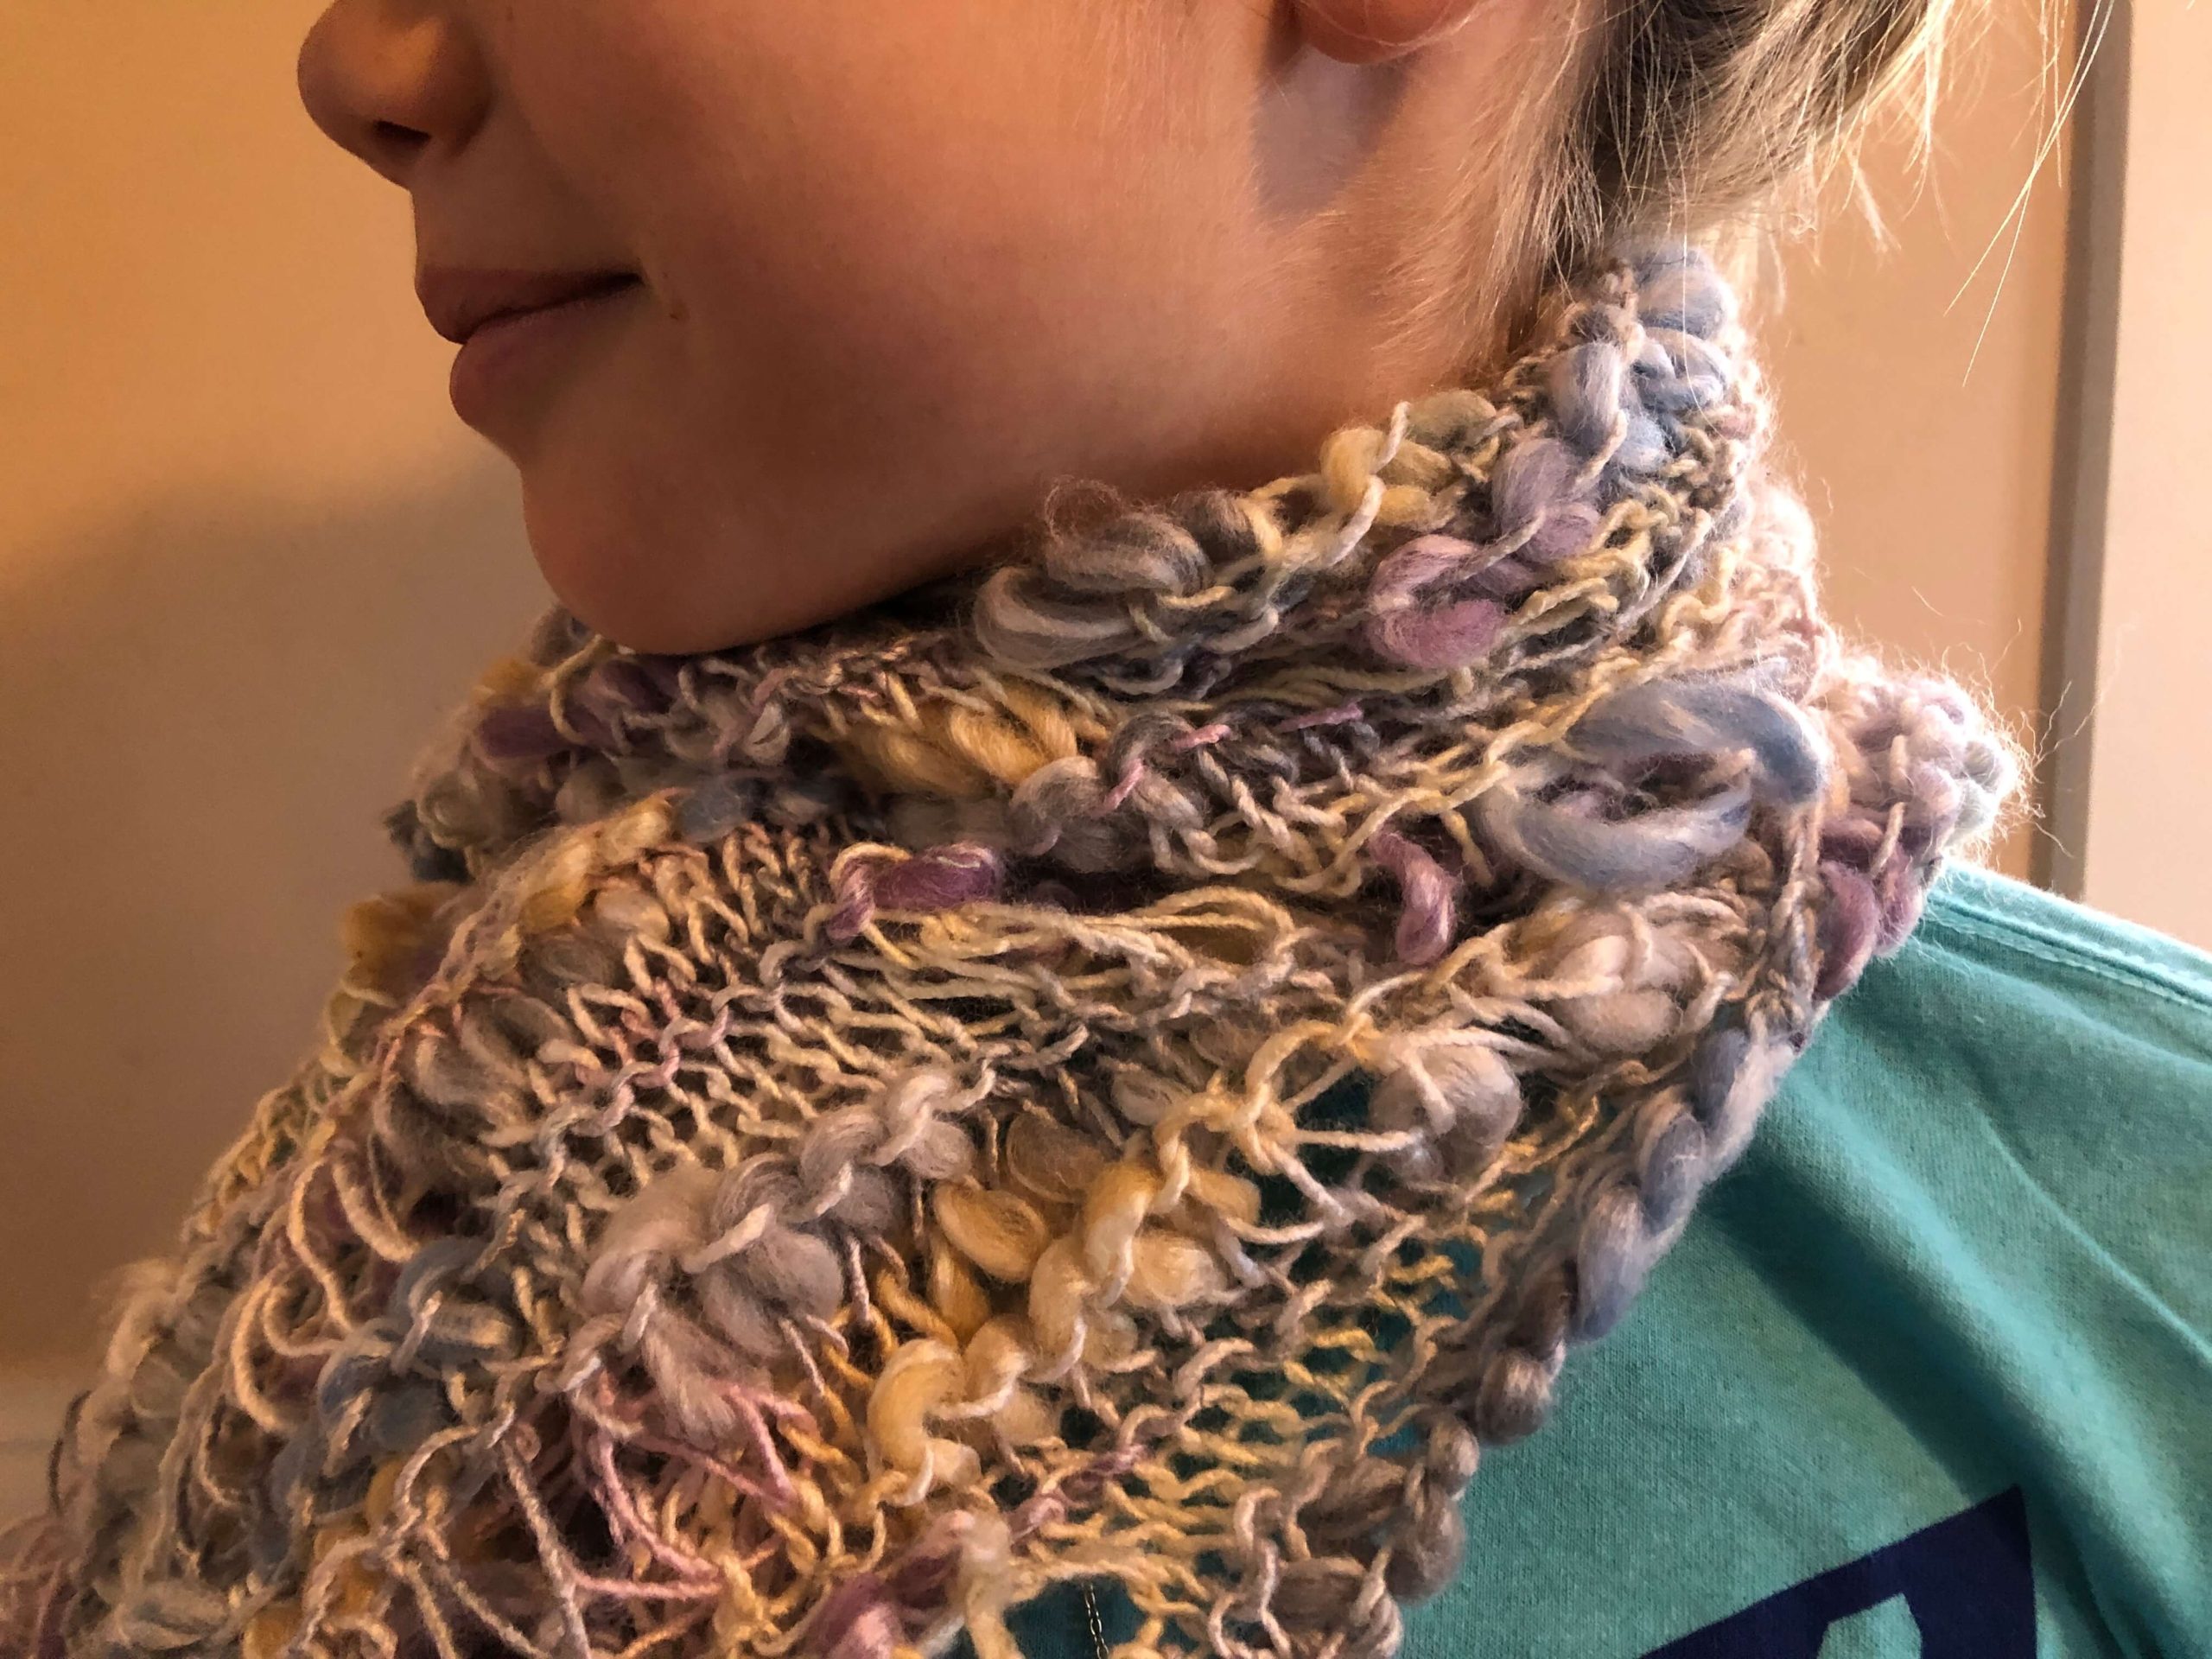 a child wears the Fairy Lights Cowl, a dropped stitch cowl knit in yarn of varying textures